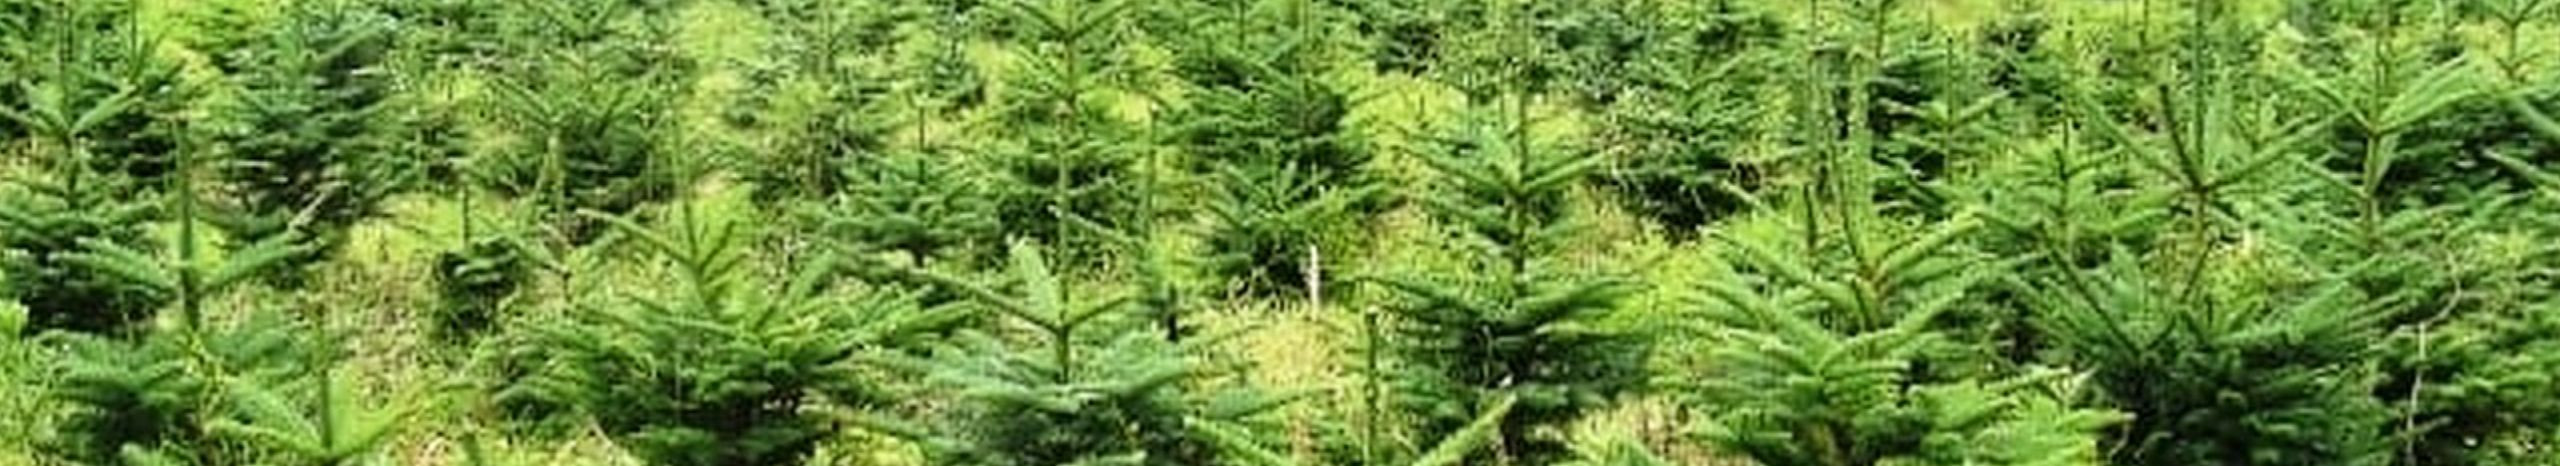 MANAGEMENT OF METSACULTURES, FINANCIAL SERVICE, green space maintenance, maintenance of immovables, logging purchase, forest cultivation, forestry management, Sustainable Forestry